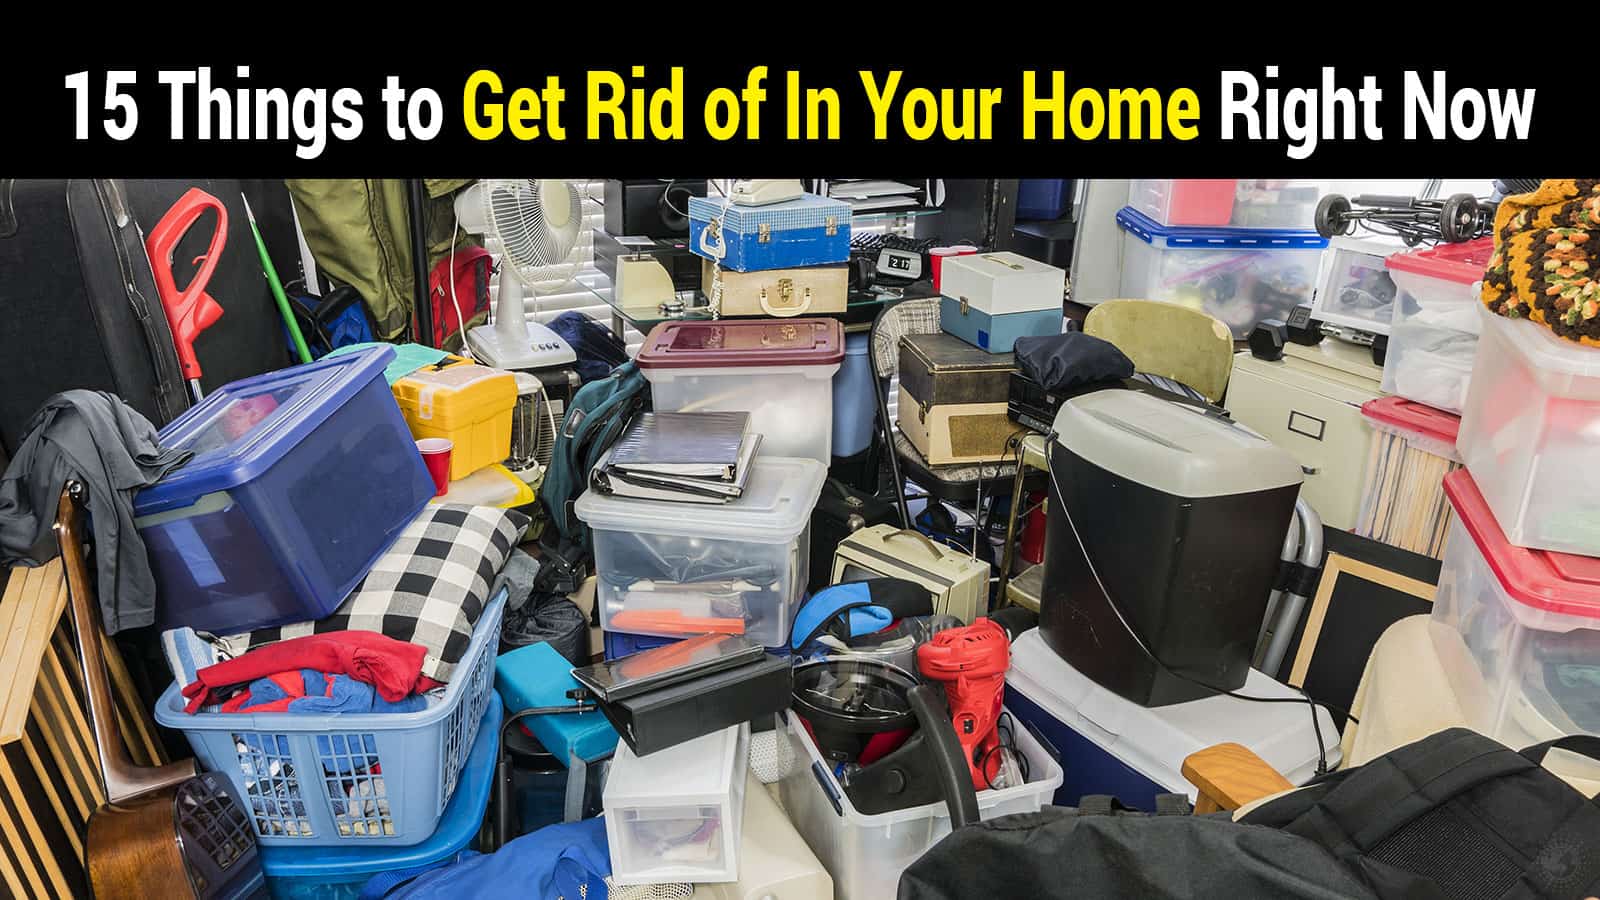 15 Things to Get Rid of In Your Home Right Now